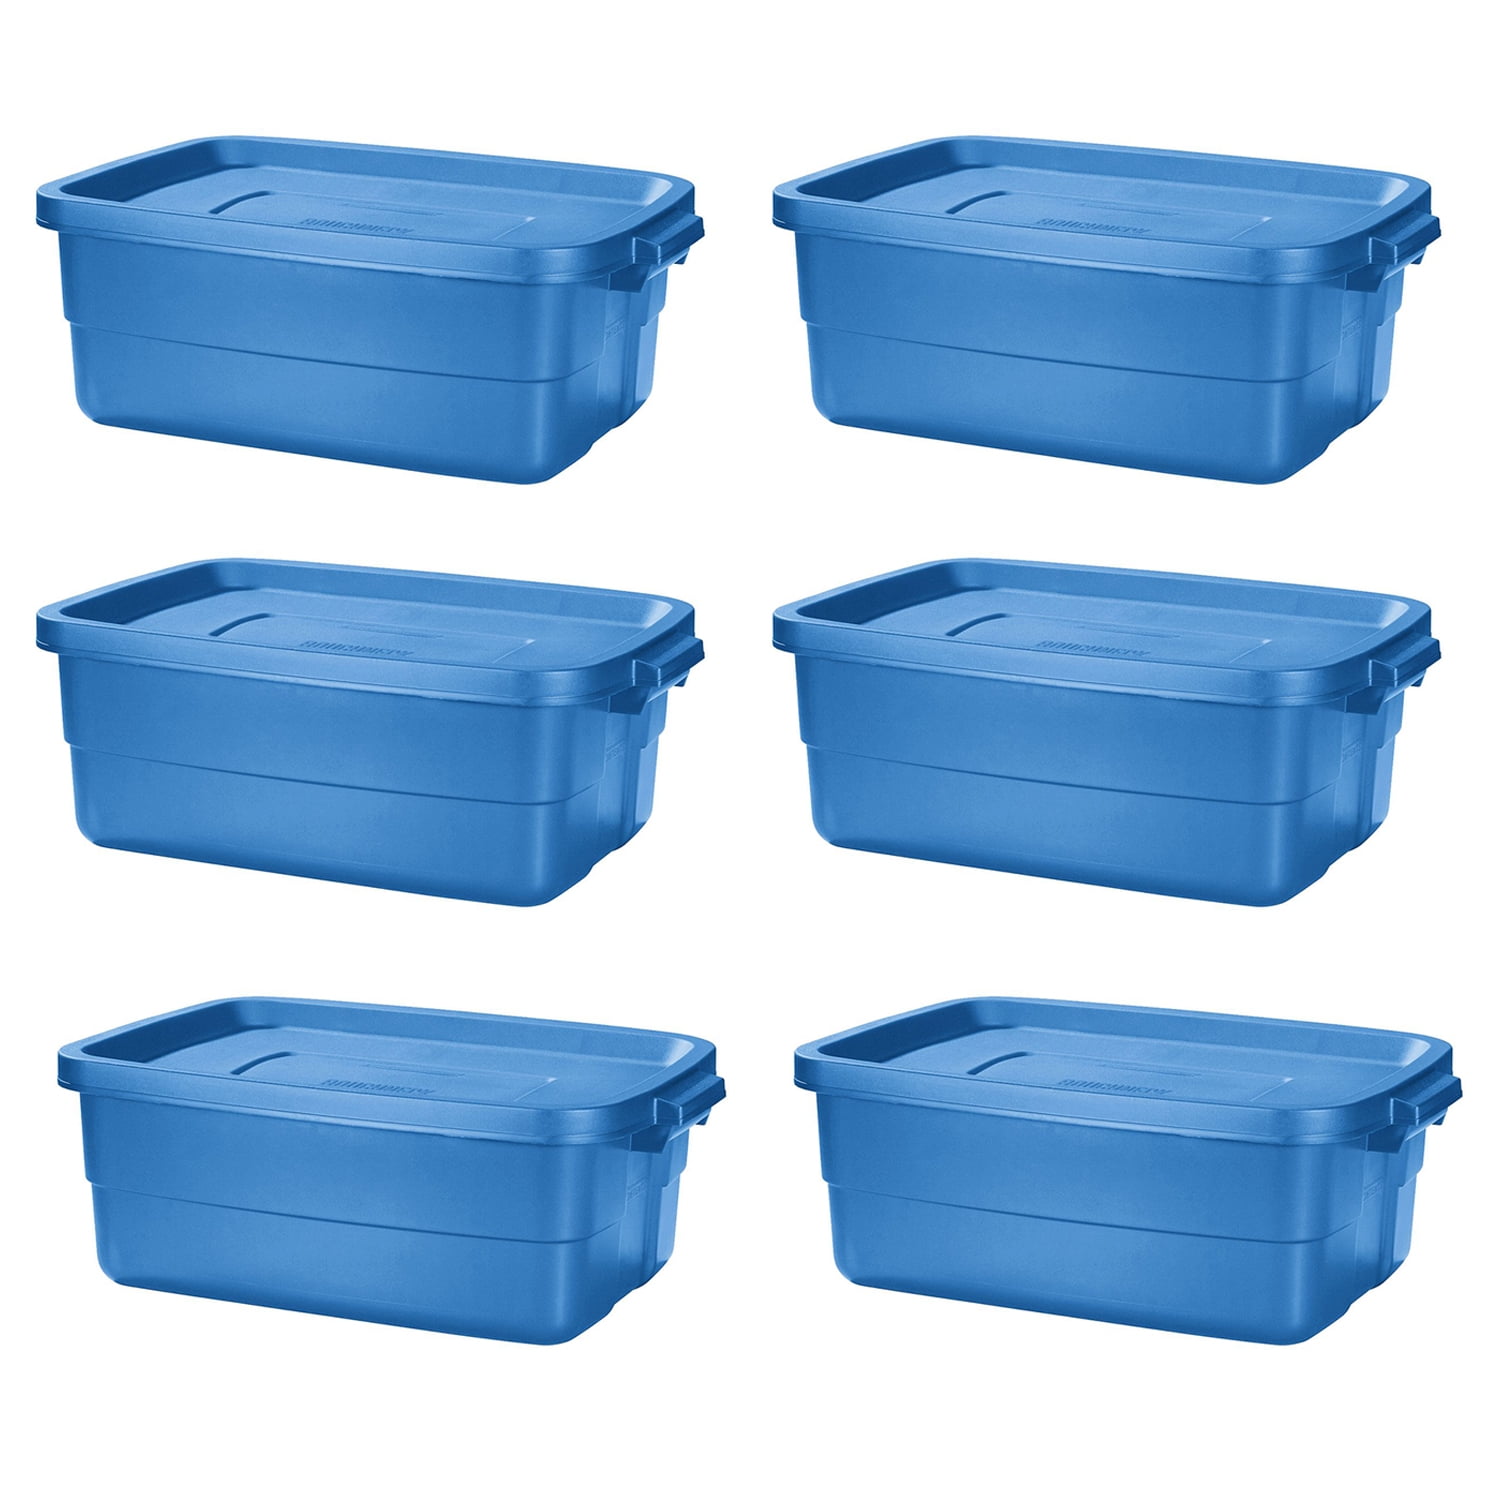 Rubbermaid Roughneck Tote 10 Gal Storage Container, Heritage Blue